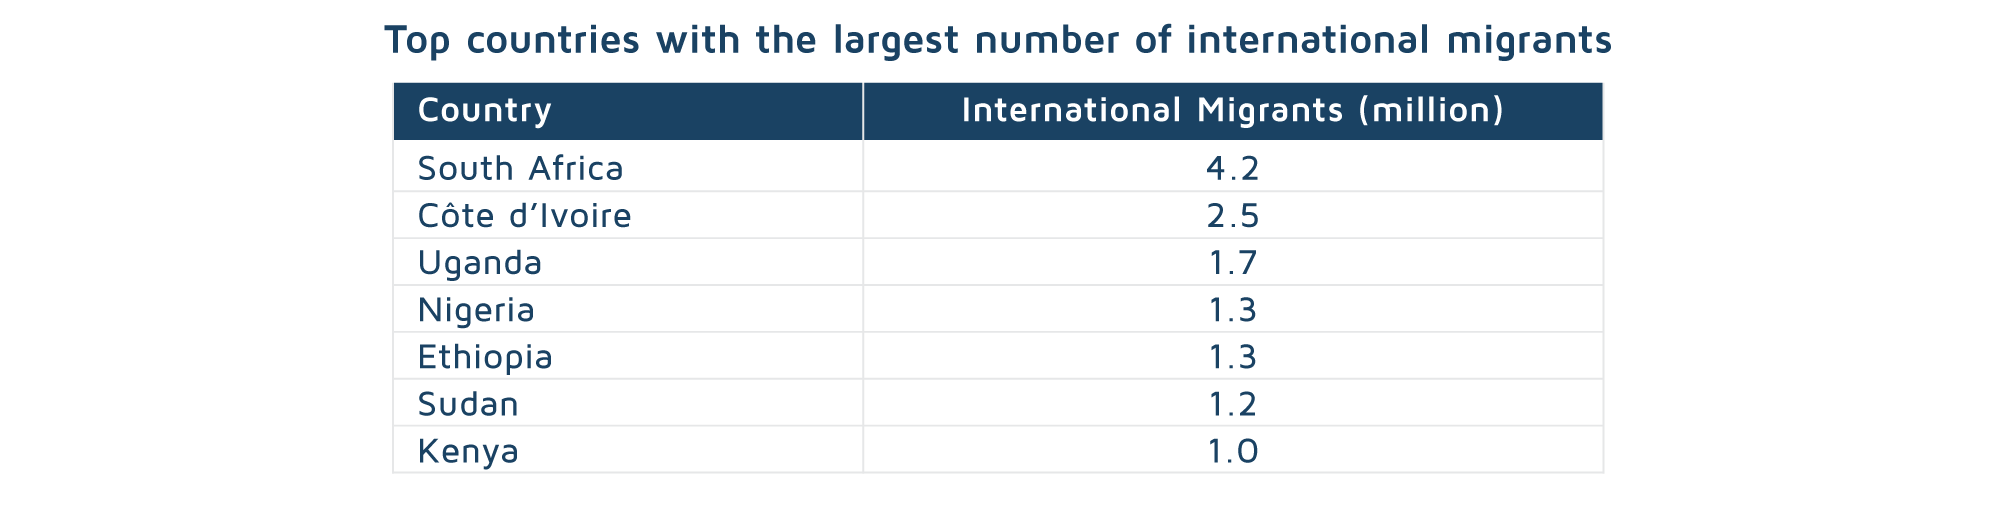 Top countries with the largest number of international migrants